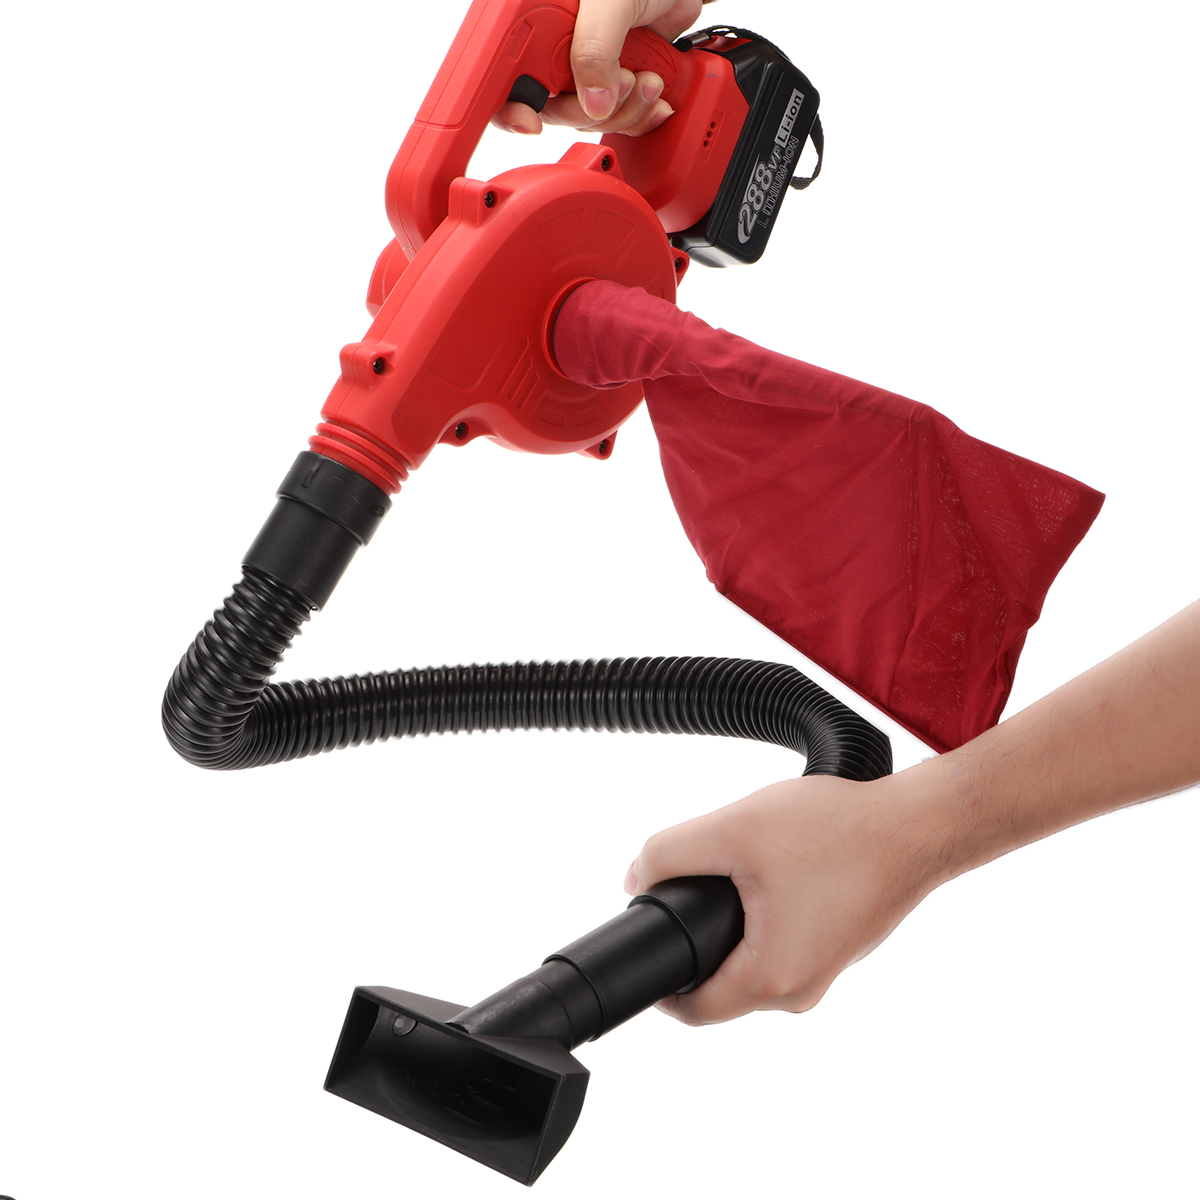 288VF-2-IN-1-Electric-Air-Blower-Kit-Cleaner-Wireless-Air-Fan-Dust-Blowing-Computer-Dust-Collector-A-1855797-10